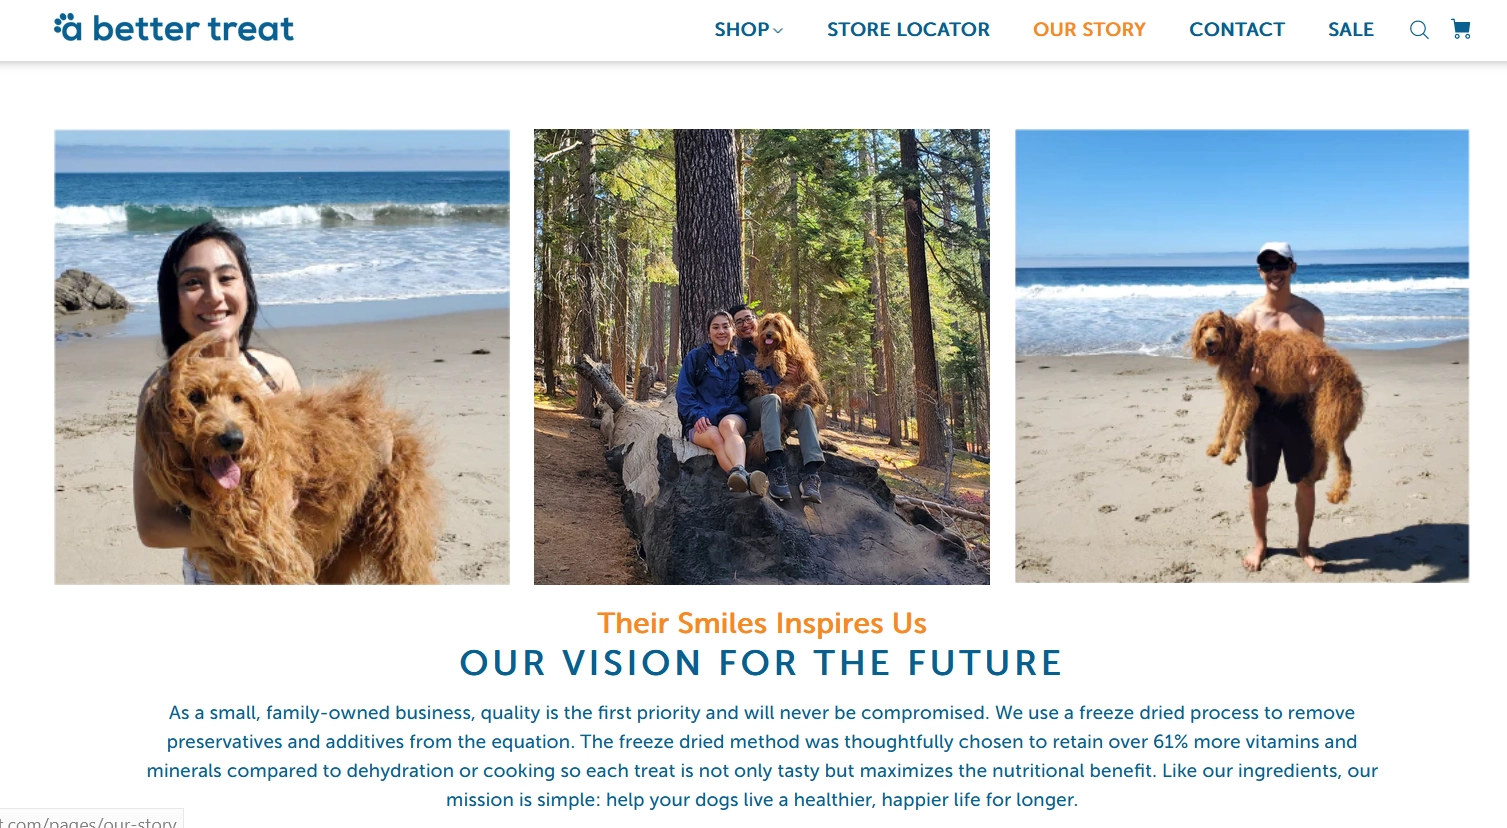 A gallery of a woman and a man taking a photo with their dog by the beach and in the forest